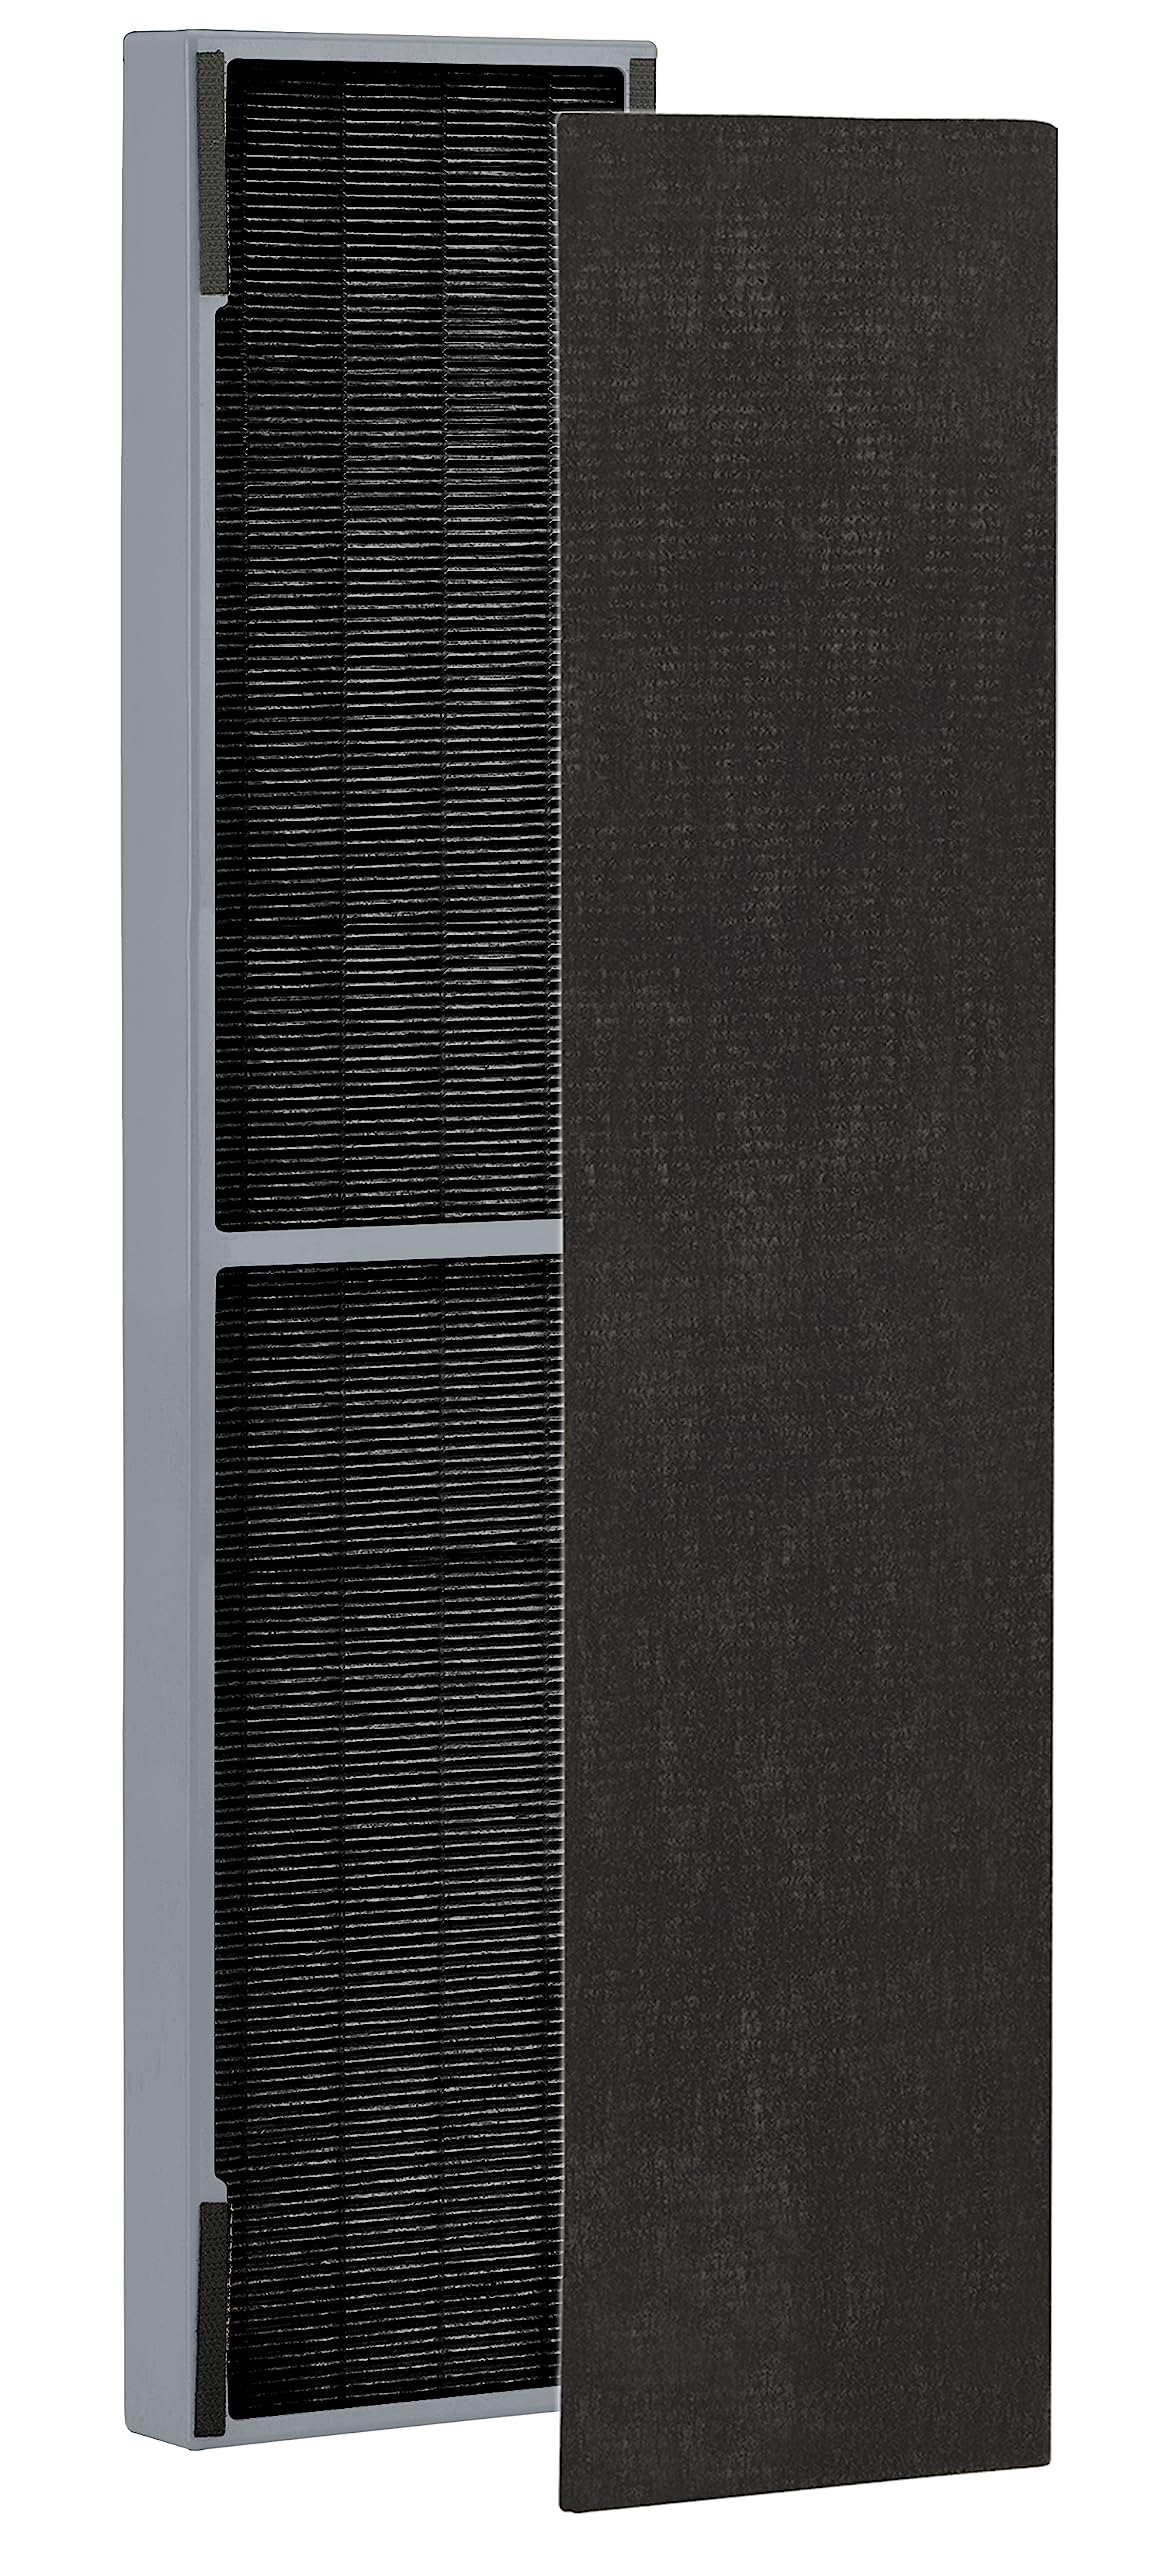 Germ Guardian Filter C Smoke Clear HEPA Genuine Replacement Filter, Removes 99.97% of Pollutants and Smoke Toxins, for AC5000, AC5250, AC5300, AC5350, CDAP5500, AP2800, Black/Gray, FLT5000SM